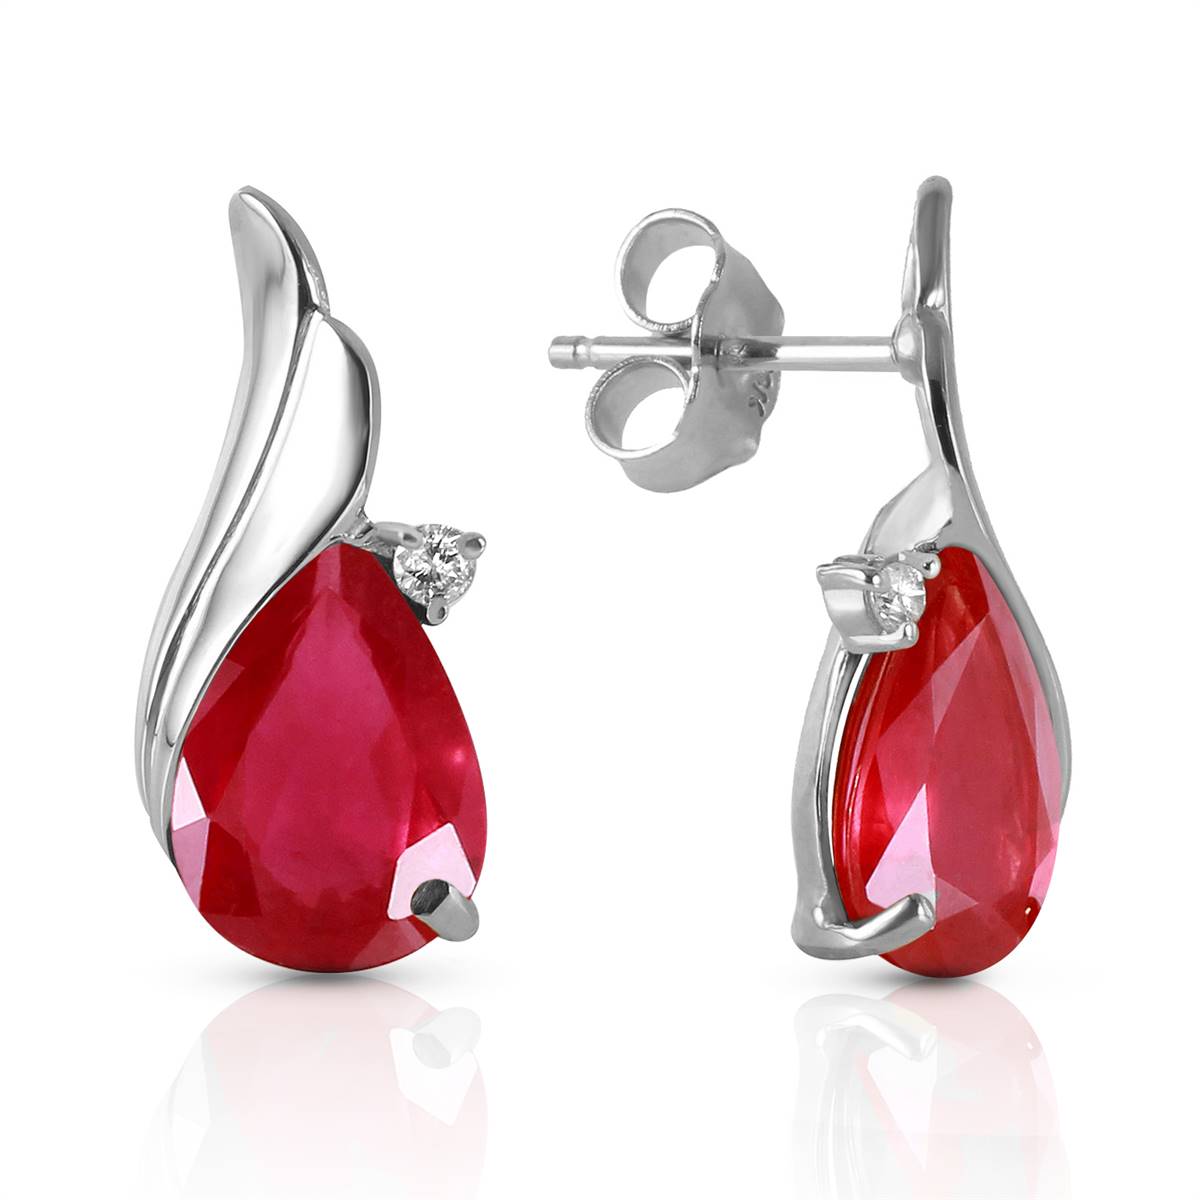 14K Solid White Gold Studs Earrings Natural Diamond & Ruby Jewelry